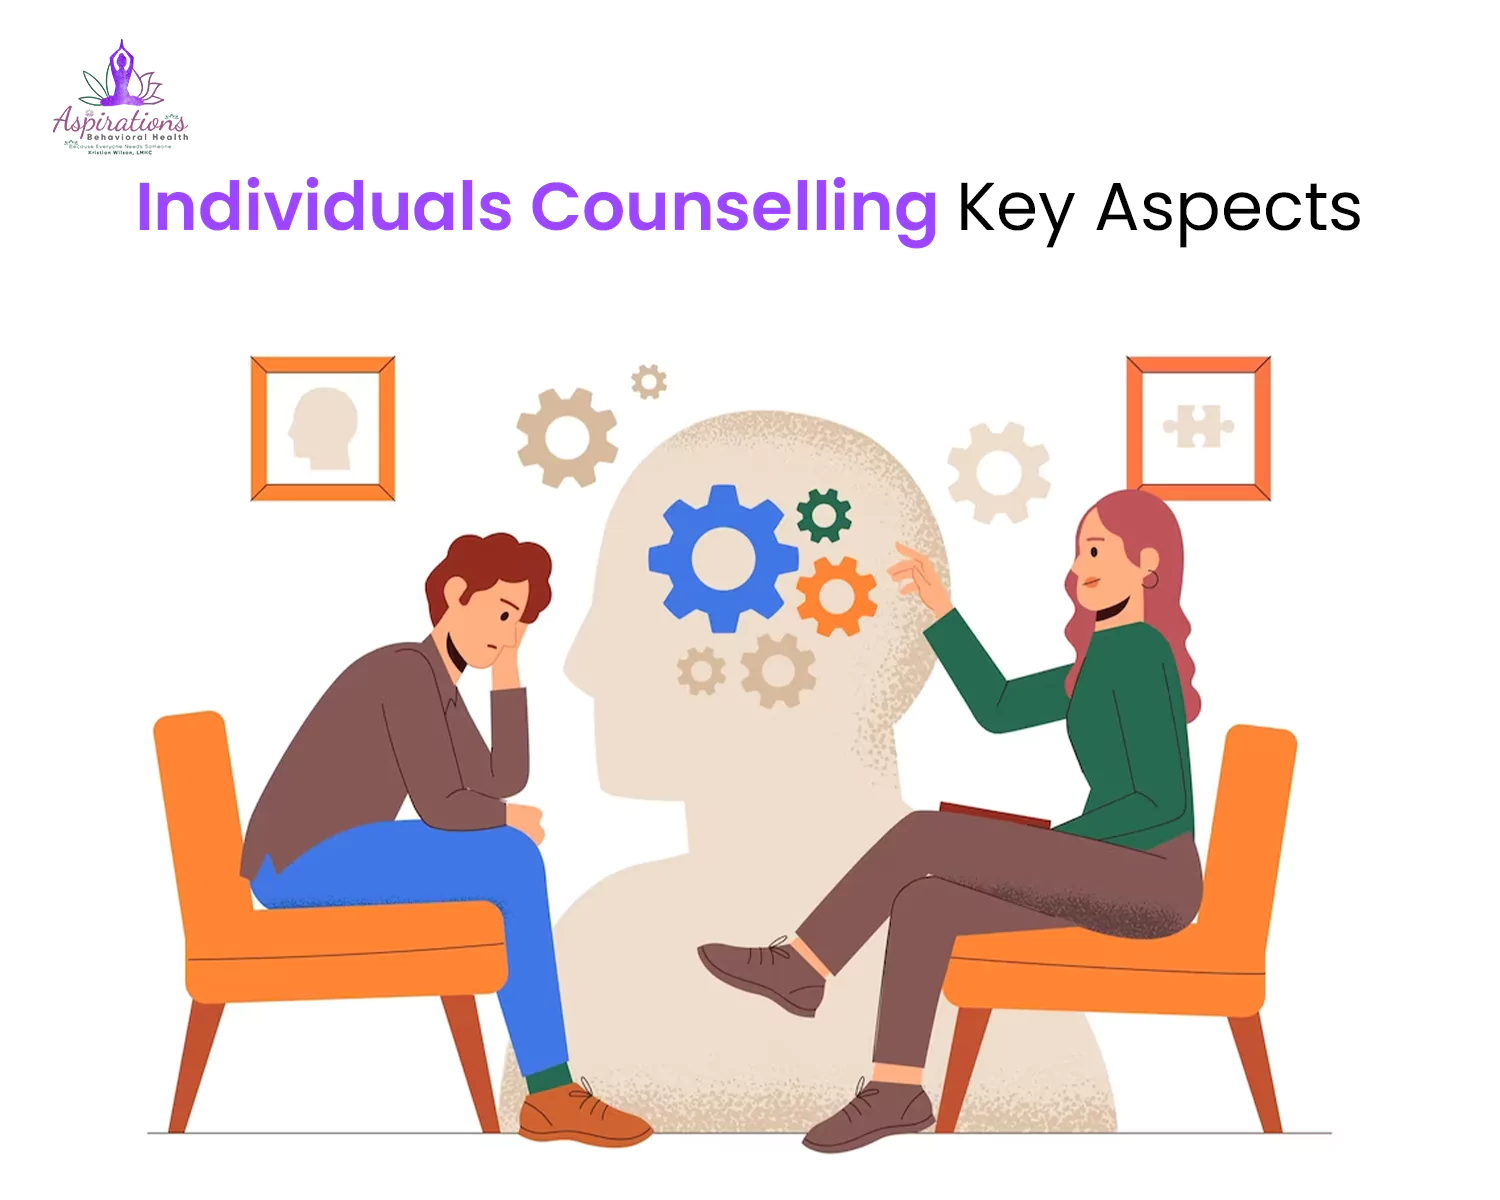 Individuals Counselling Key Aspects